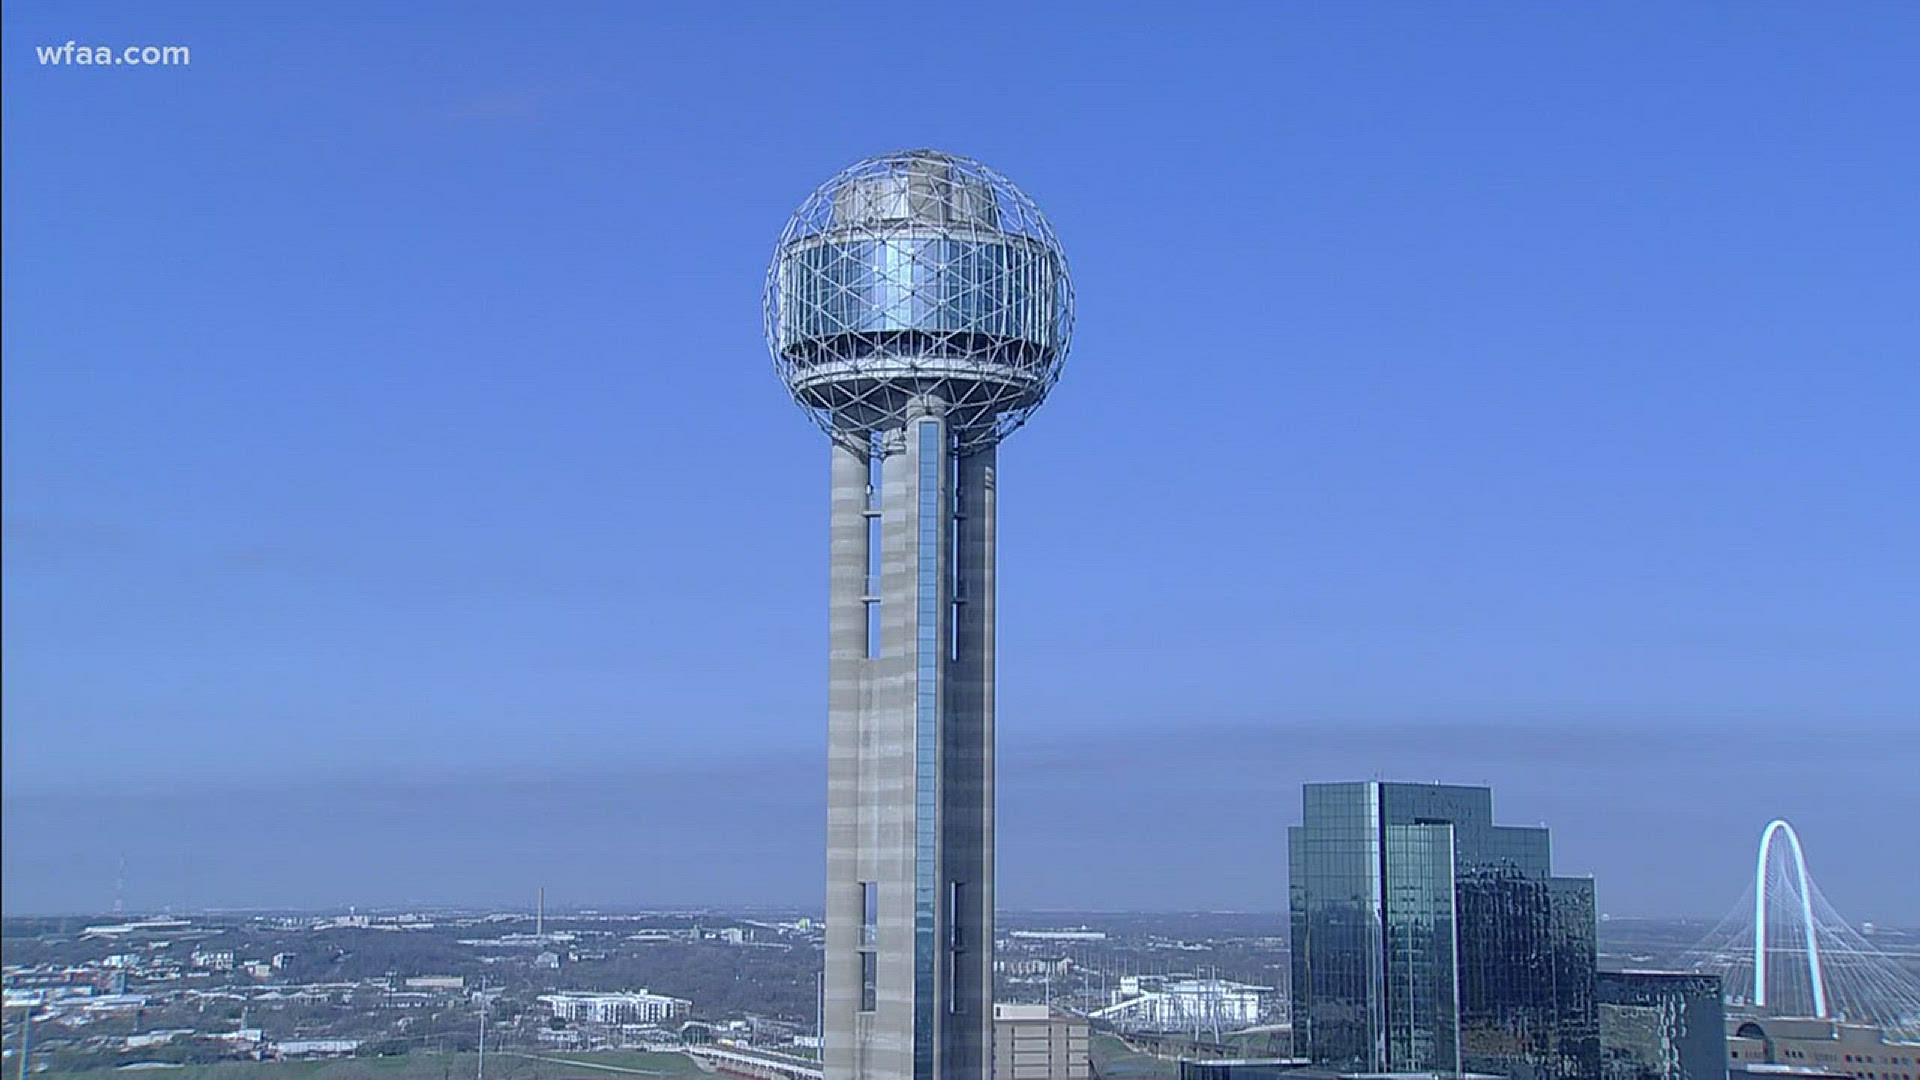 A few fun things to do at Reunion Tower as we head into spring.